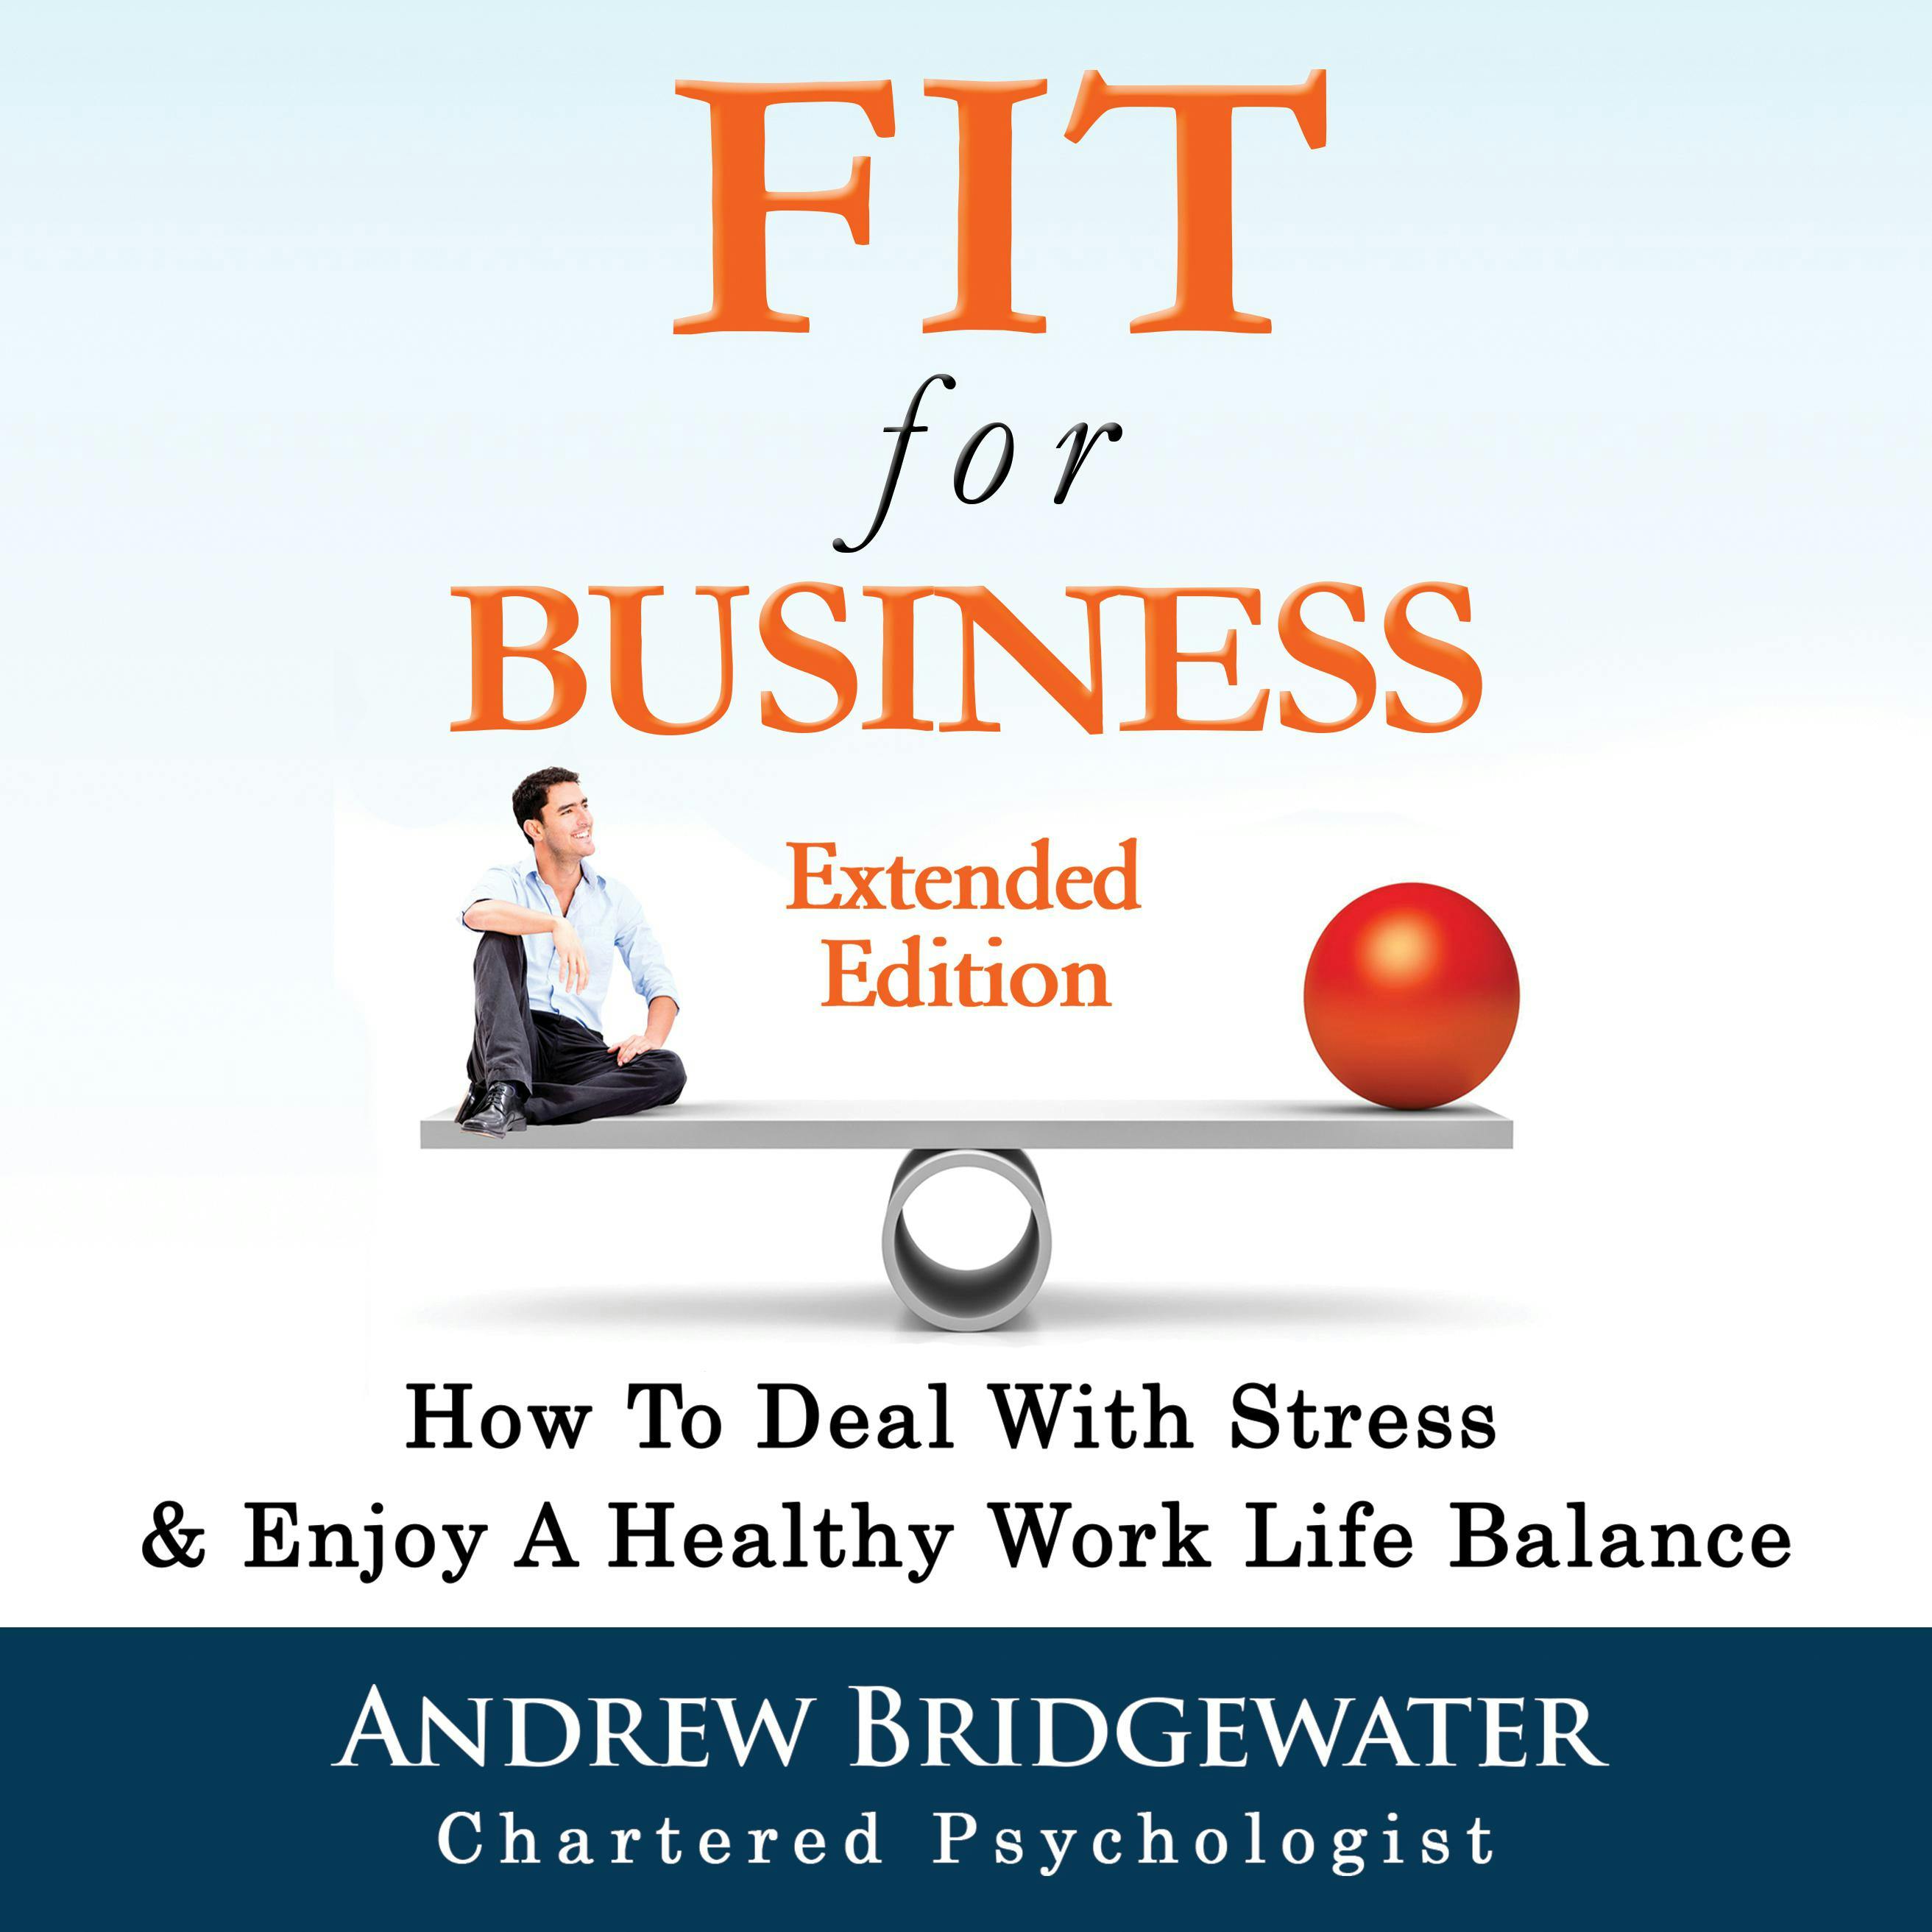 Fit For Business - Extended Edition: How To Deal With Stress & Enjoy A Healthy Work Life Balance - Andrew Bridgewater